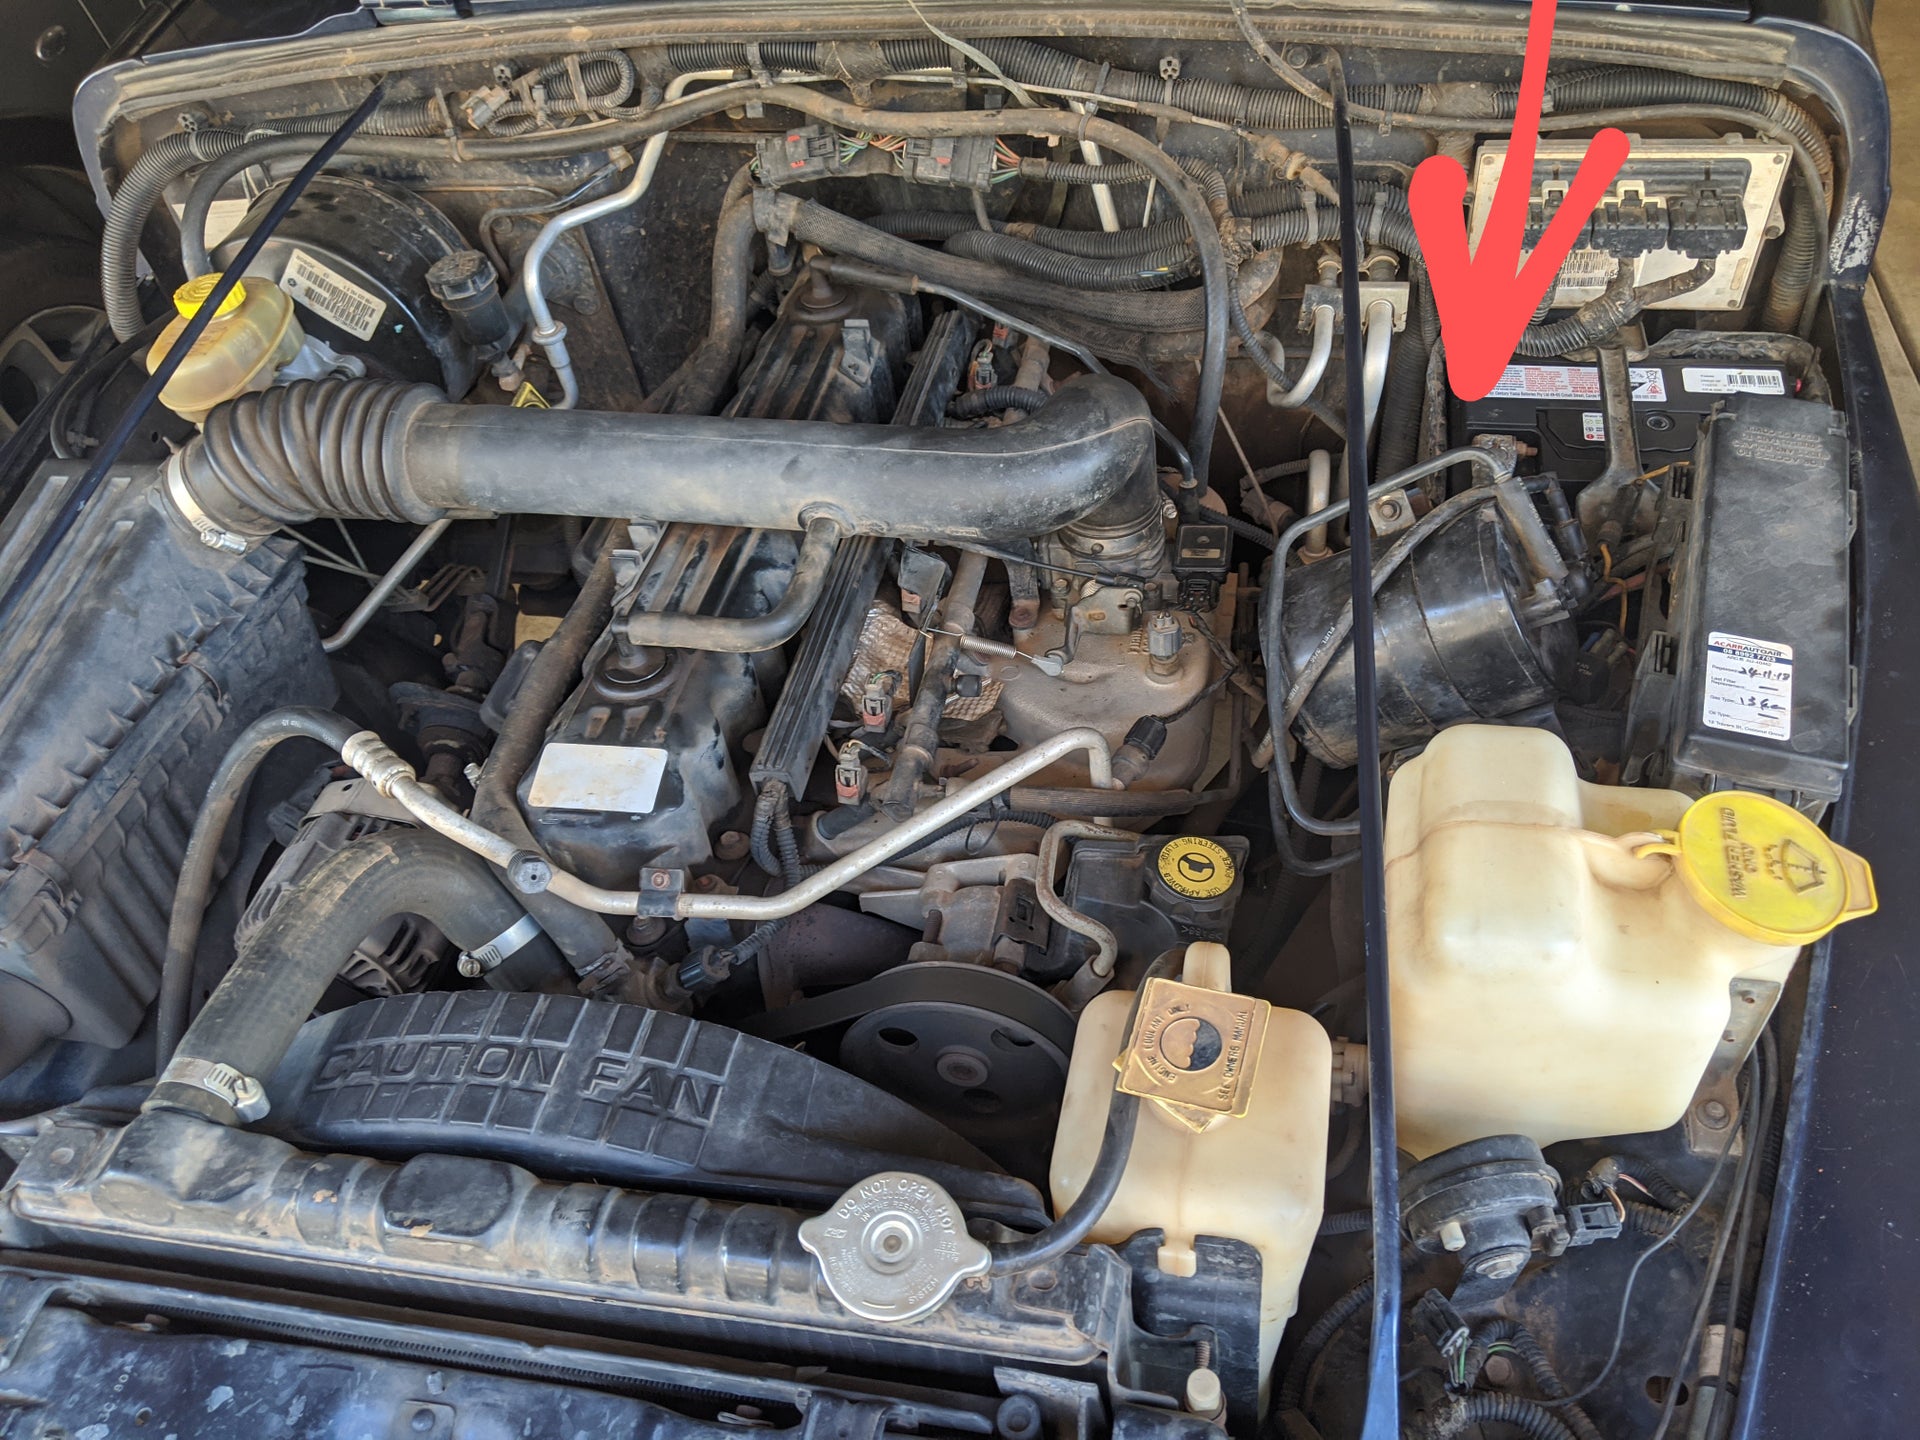 Need Help ID'ing Black cylinder in engine bay | Jeep Wrangler Forum